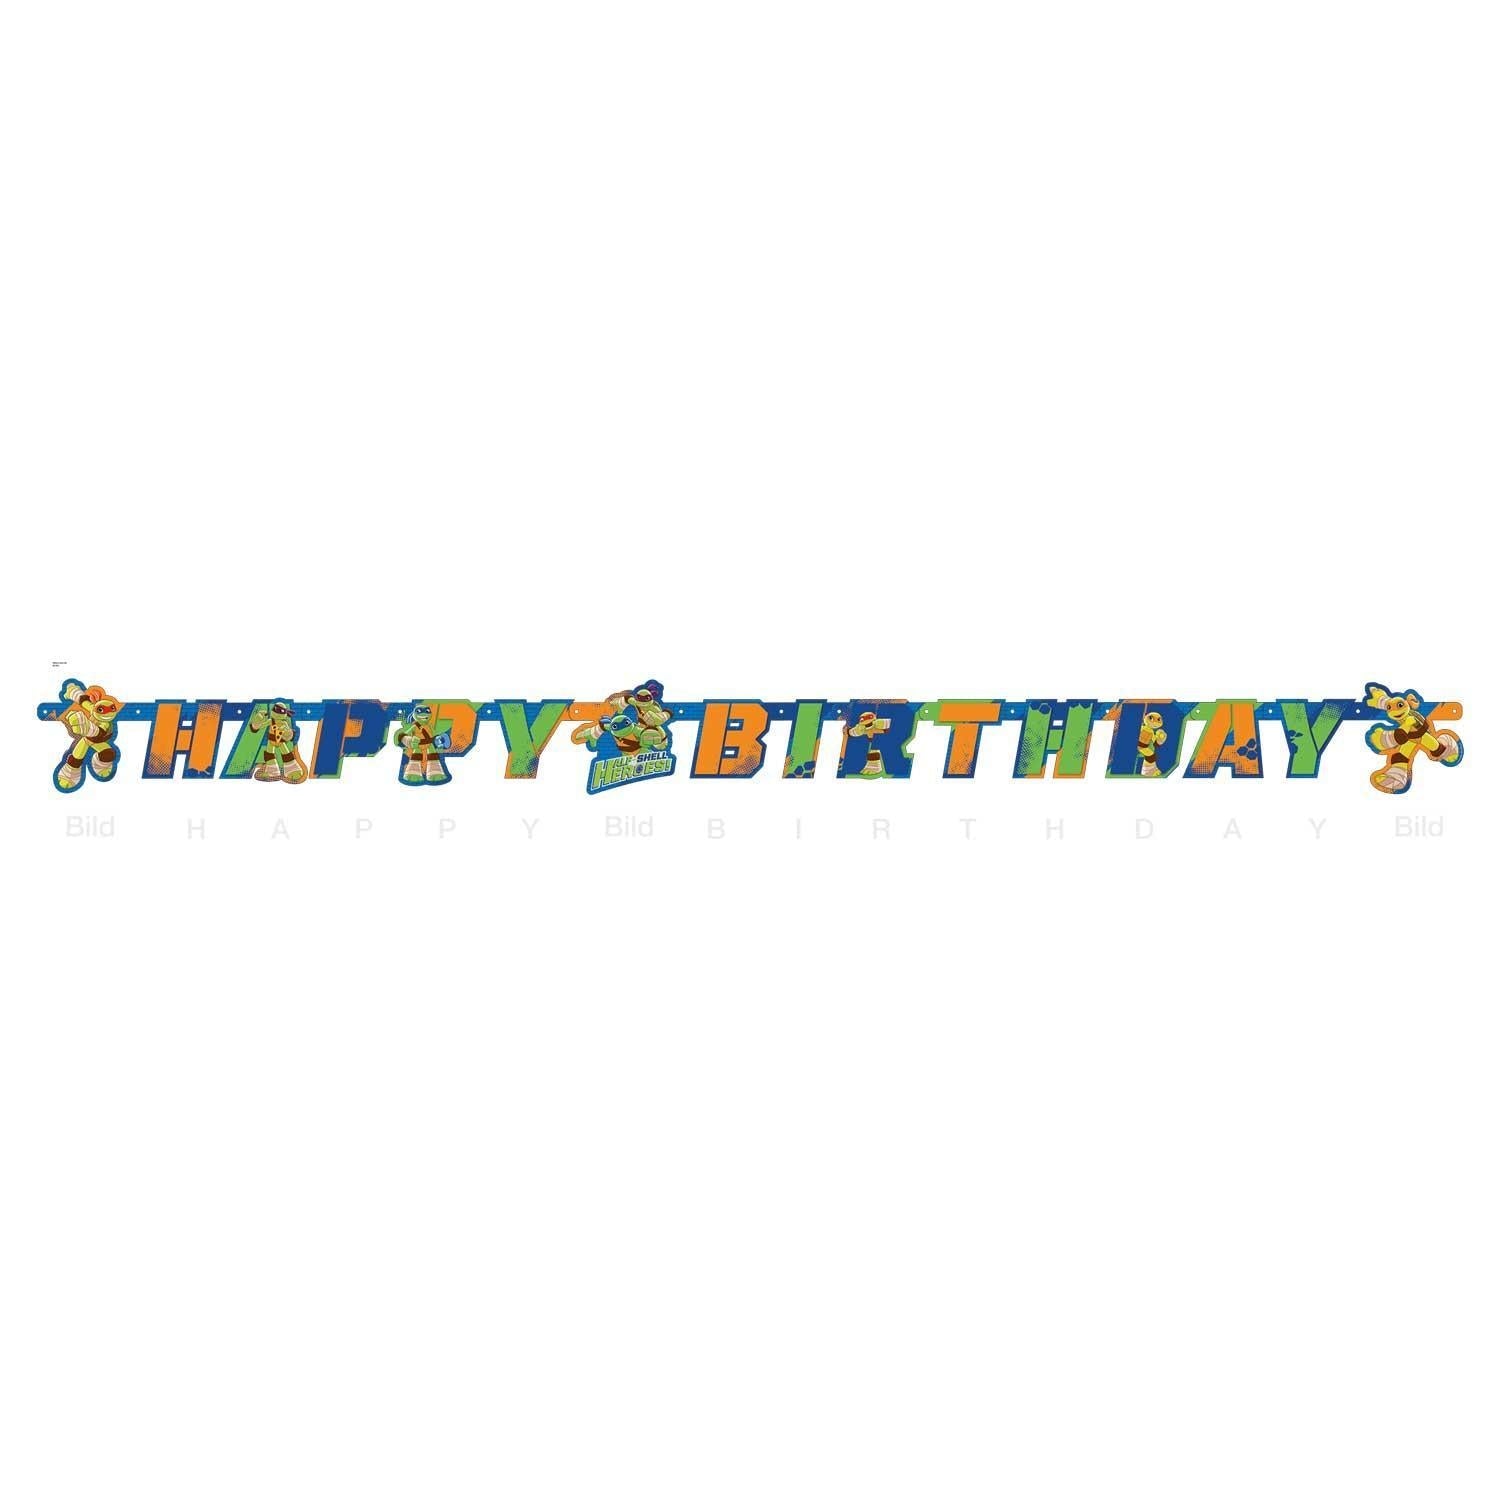 Half Shell Heroes Letter Banner 1.8m x 14cm Decorations - Party Centre